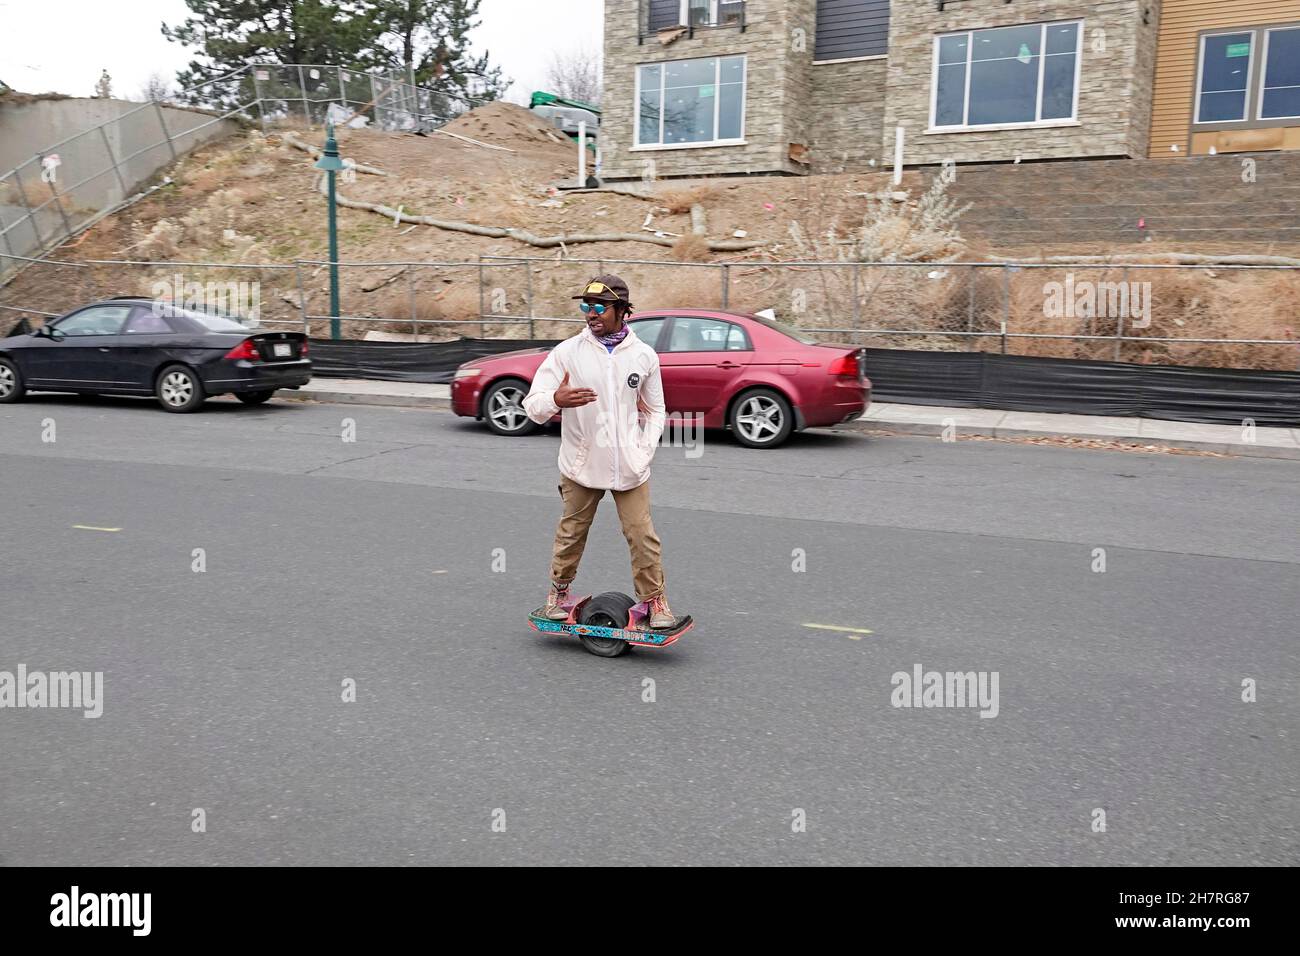 A young African-American man on a Onewheel Hoverboard, driving down a  residential street in Bend, Oregon Stock Photo - Alamy